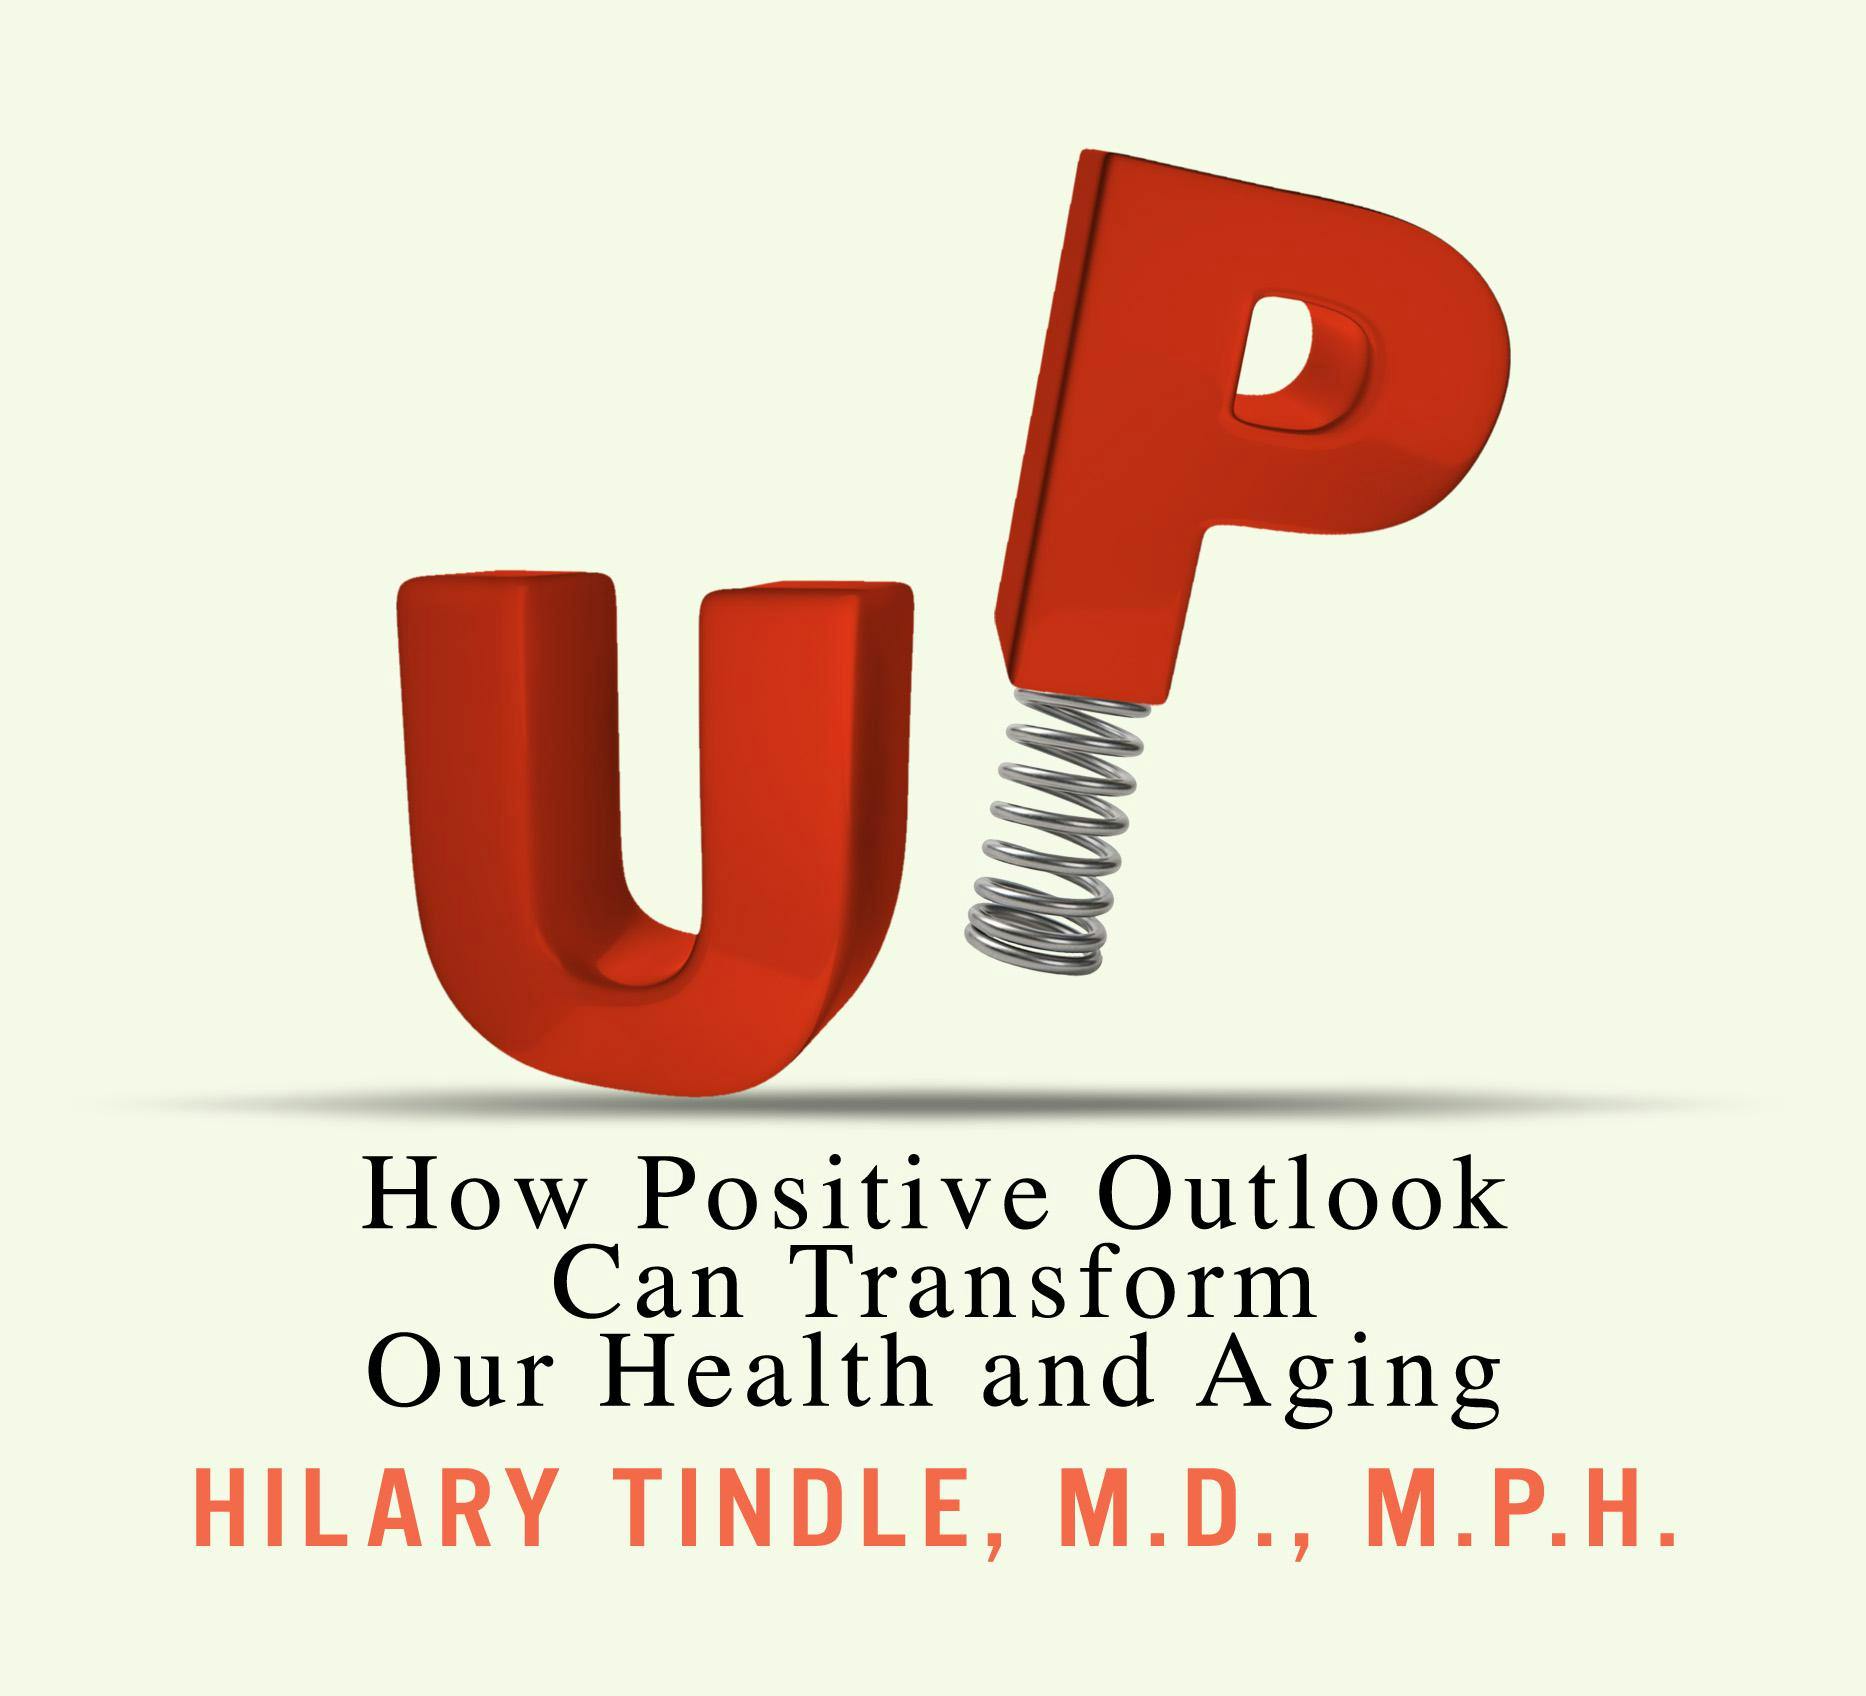 Up: How Positive Outlook Can Transform Our Health and Aging - undefined